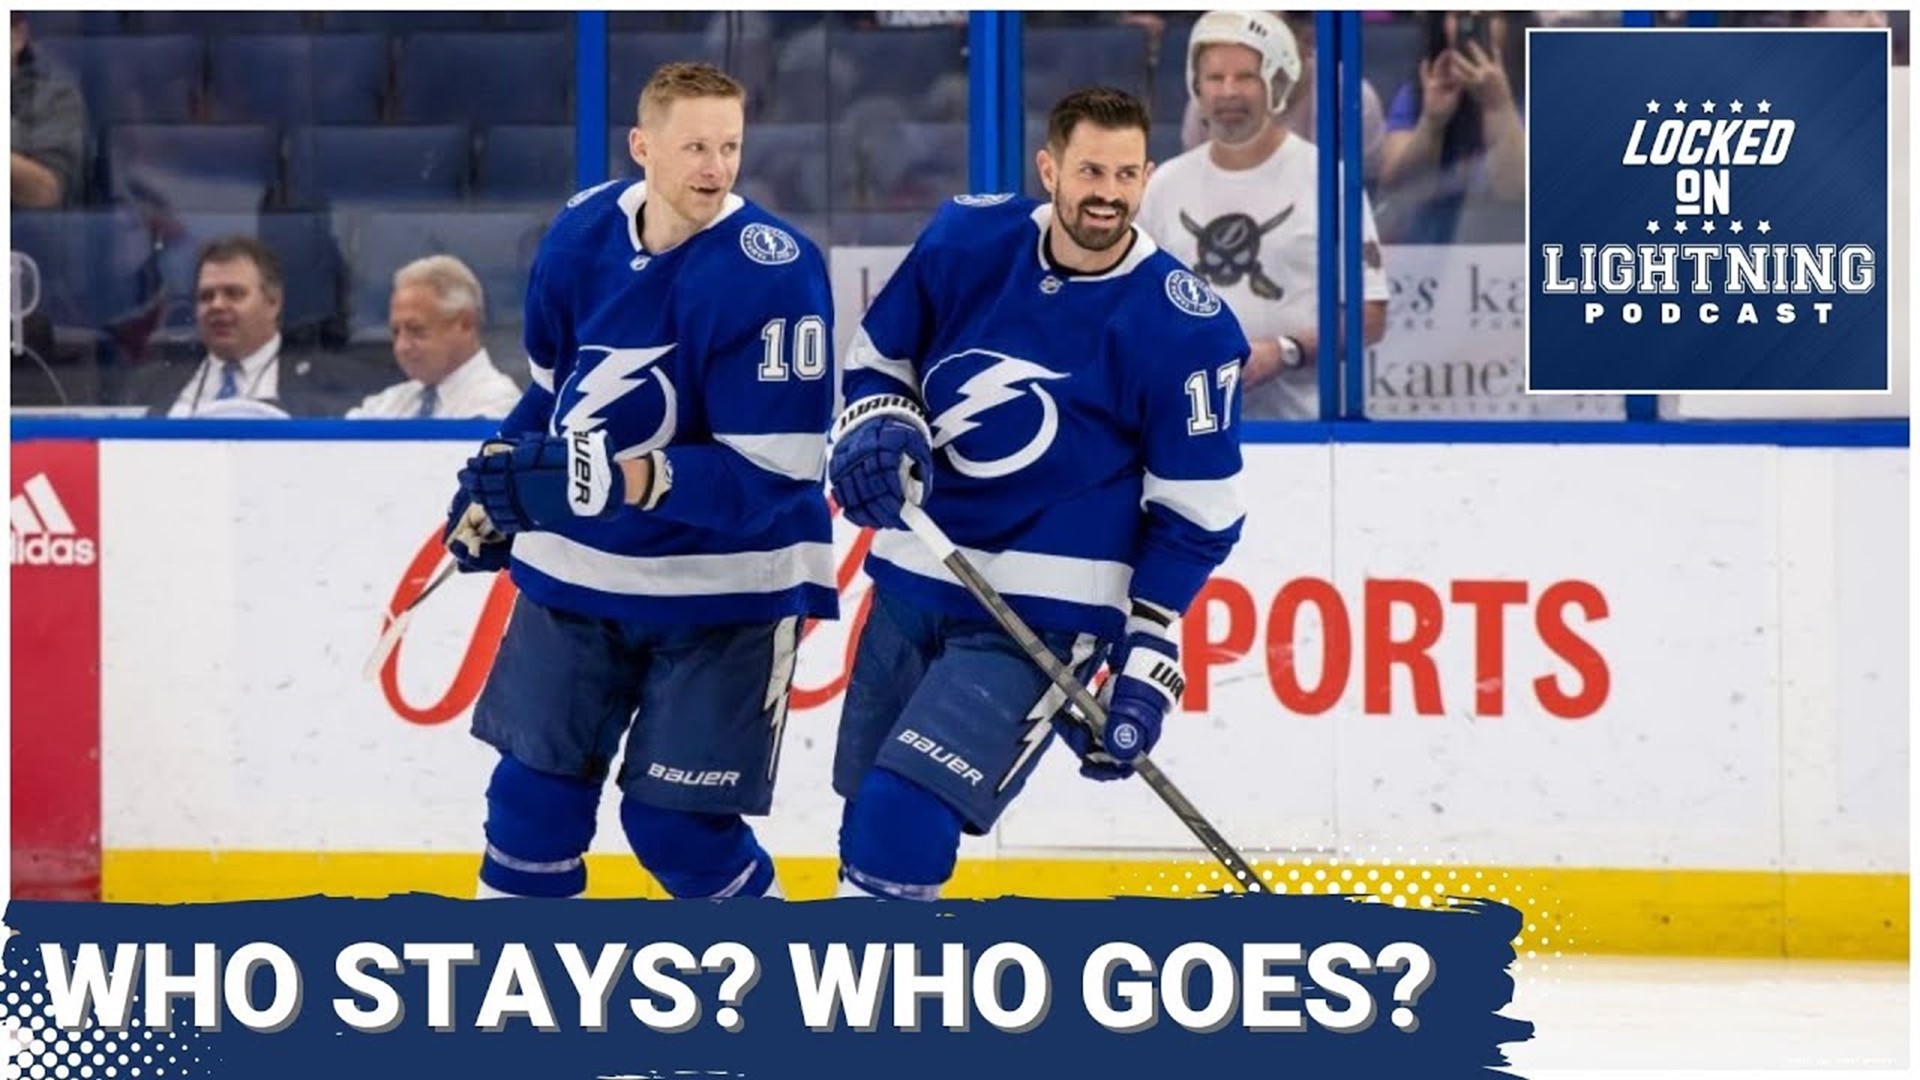 This offseason will be one of the busiest for the Lightning as they look to bolster some of the weak spots on the roster.